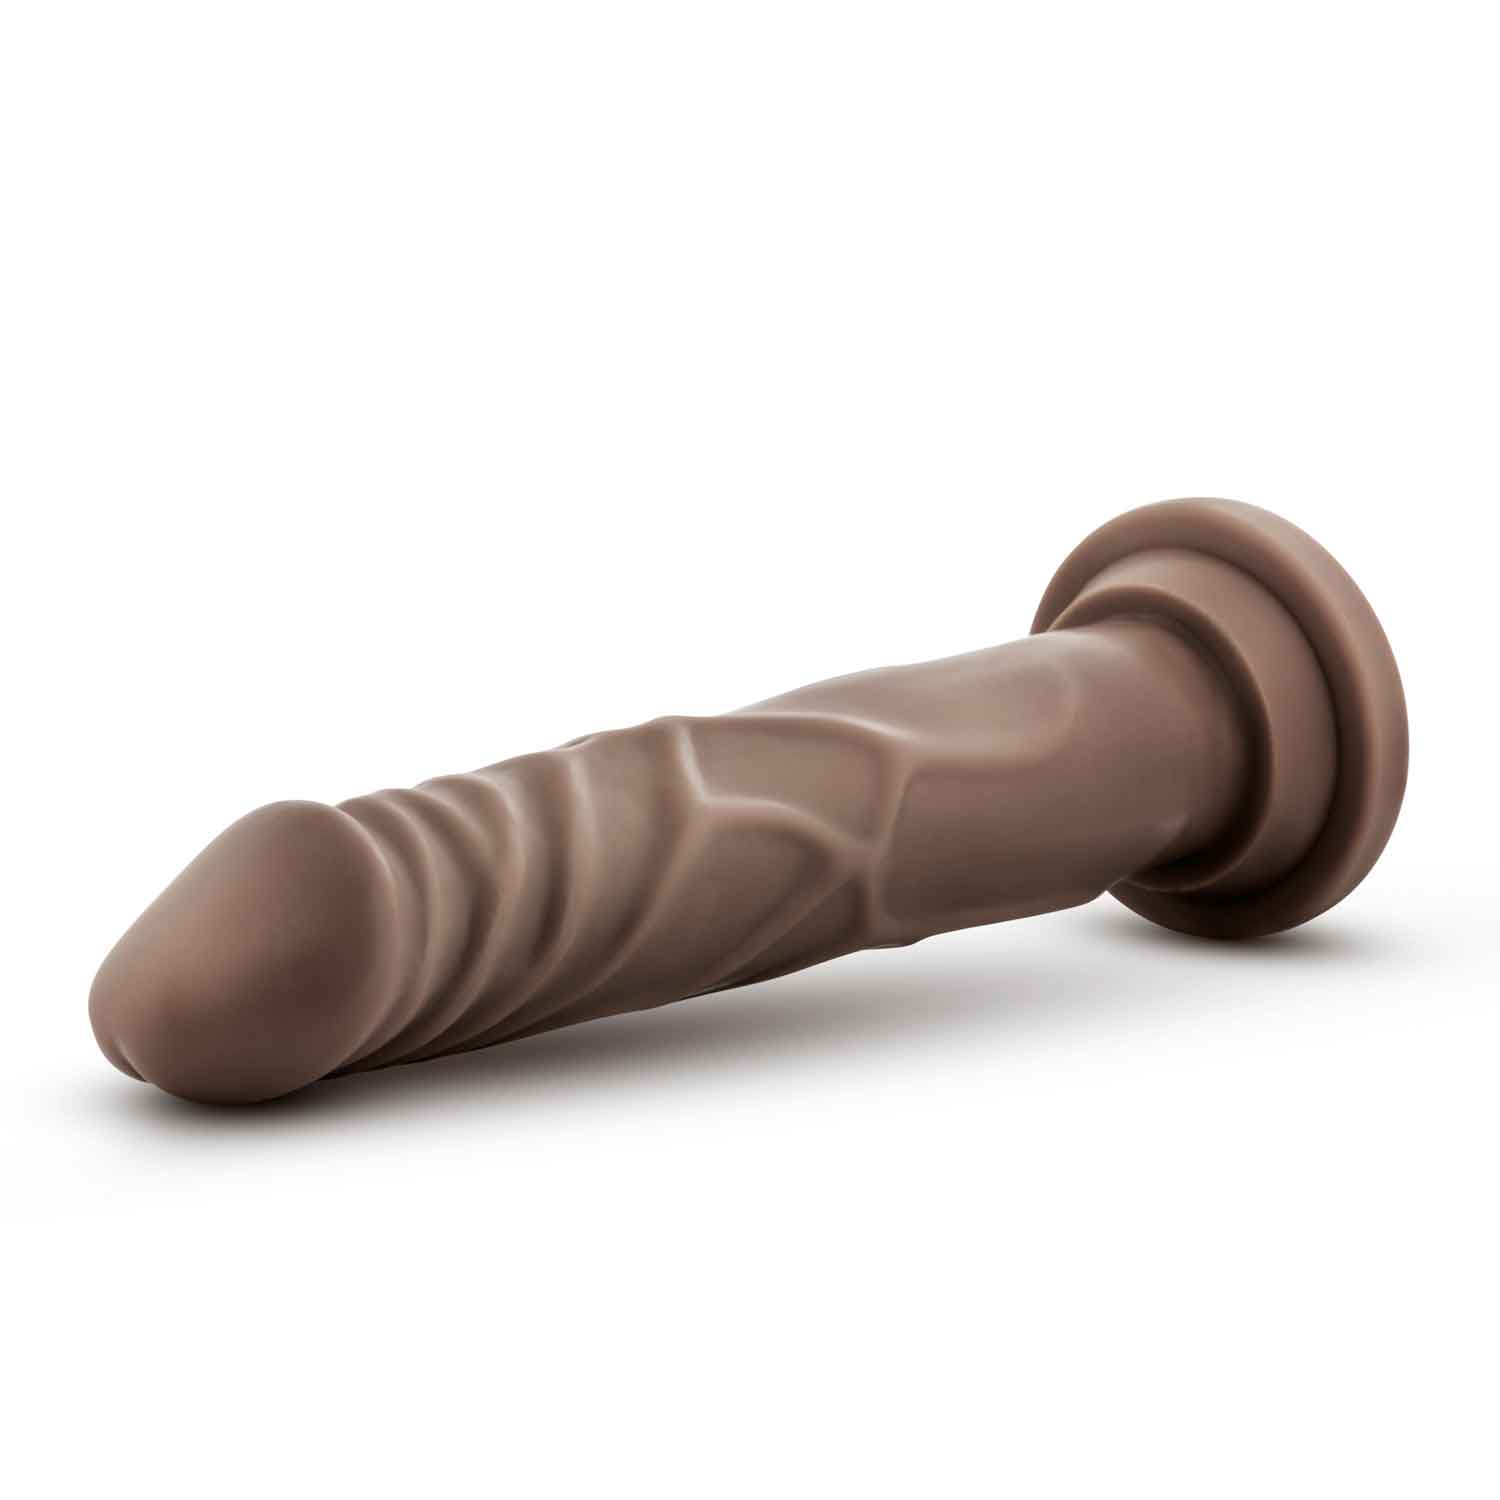 Dr. Skin Silicone - Dr. Carter - 7 Inch Dong With  Suction Cup - Chocolate-3